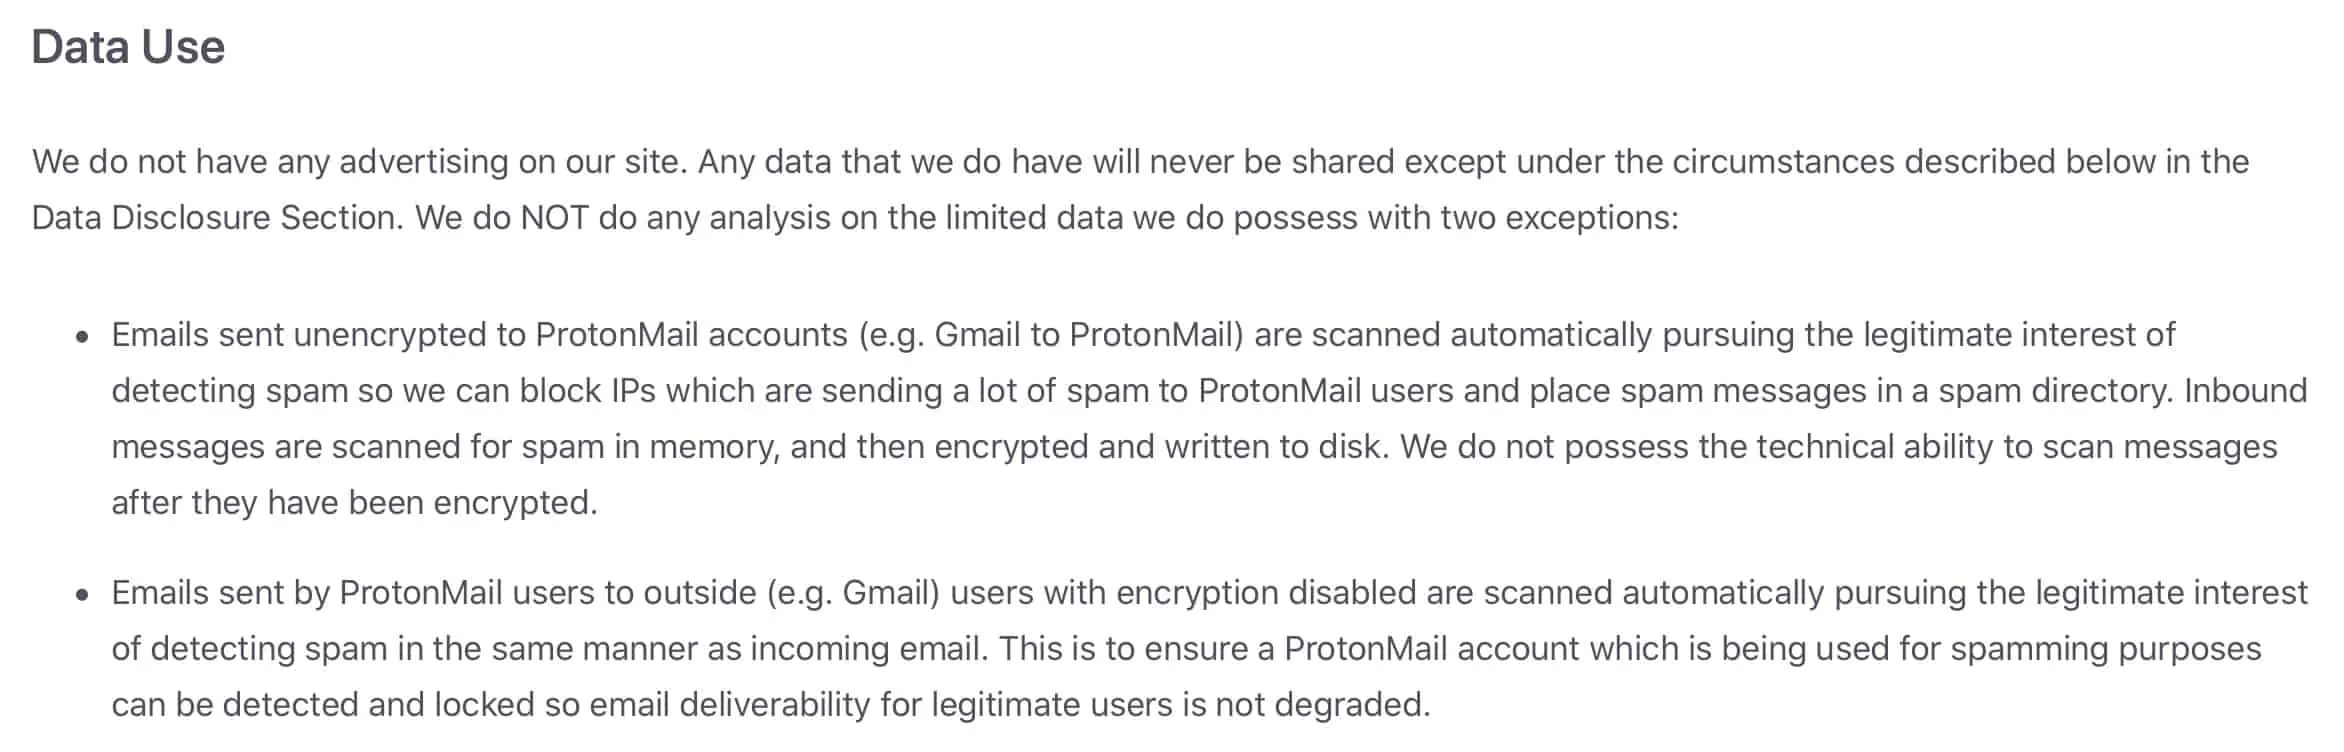 ProtonMail - Privacy Policy